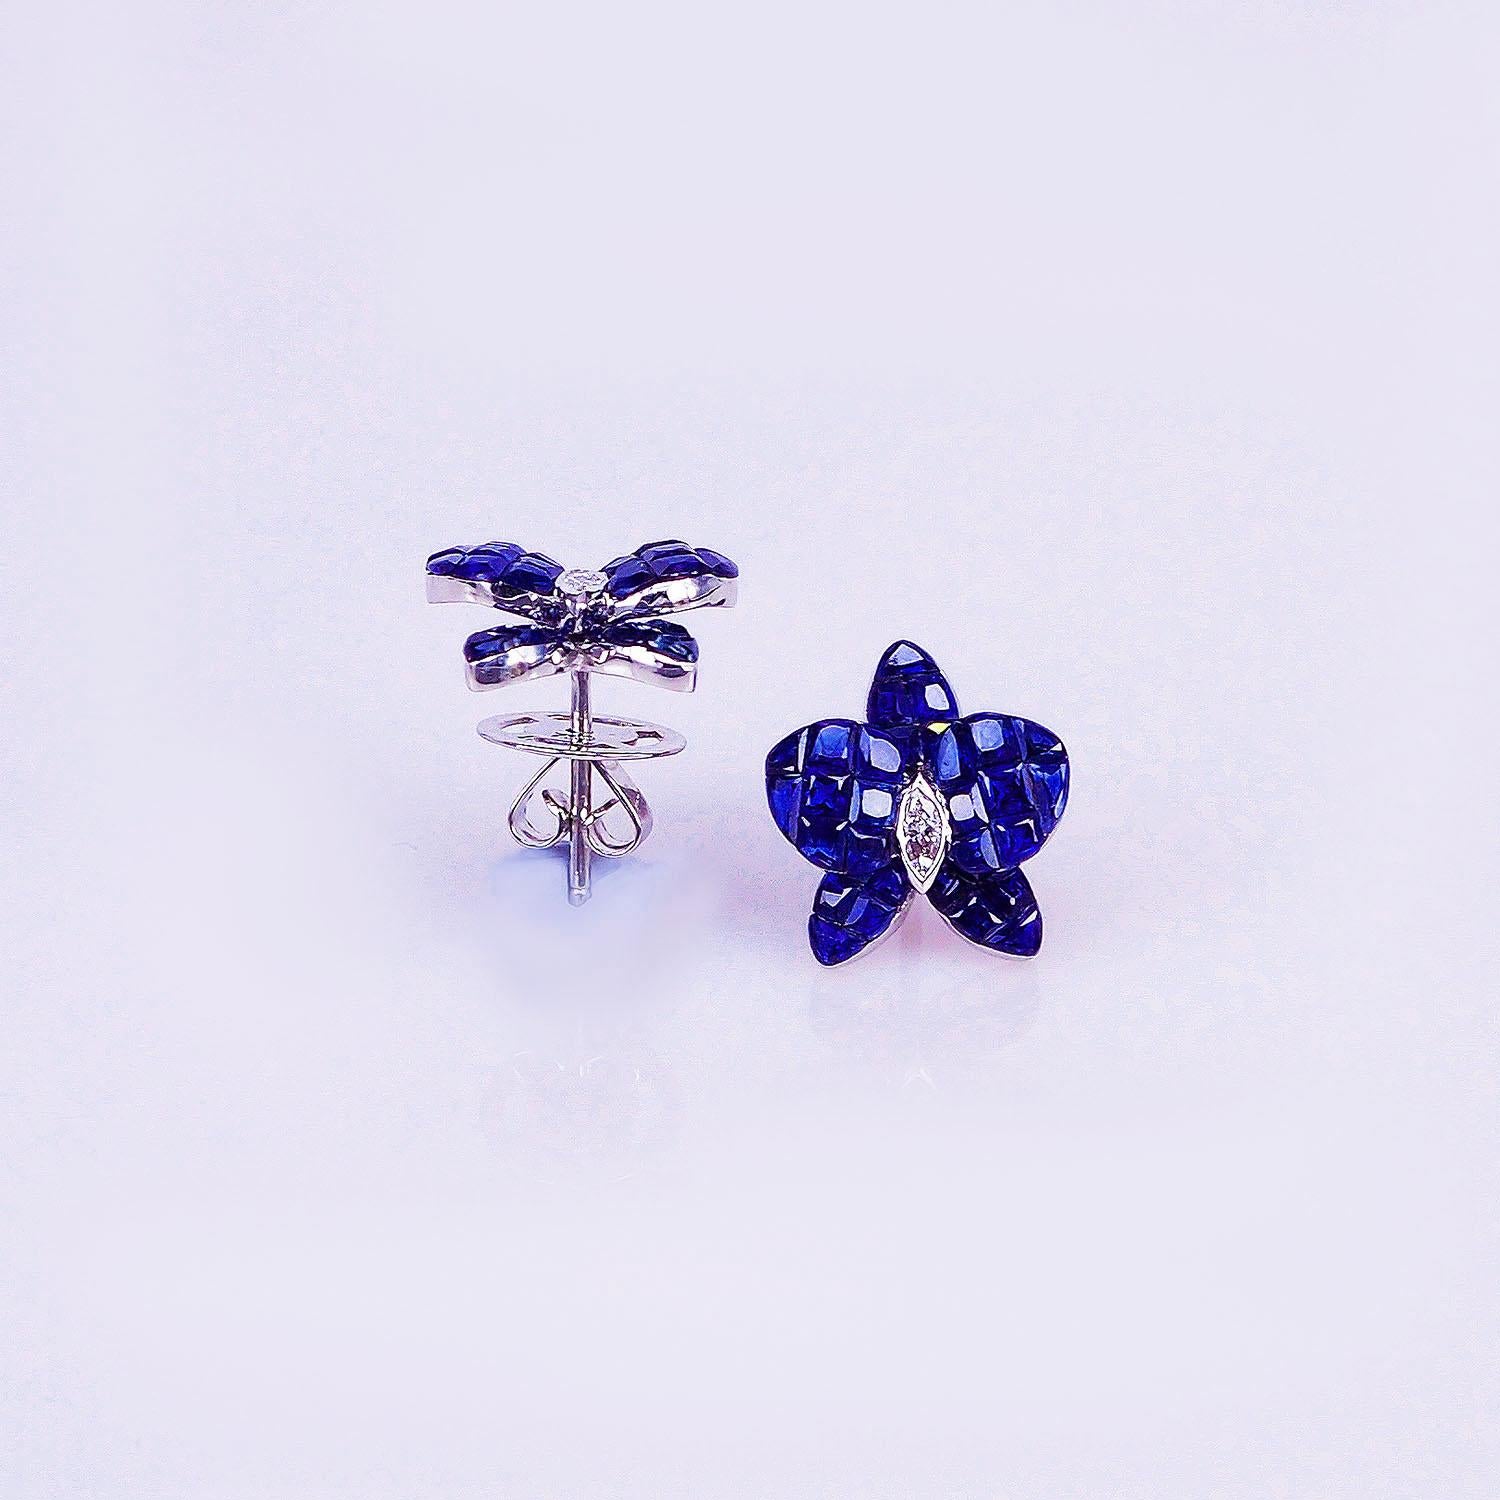 A lovely sapphire stud earrings that you can use as everyday.We use the top quality Sapphire for our invisible setting.It is deep blue and very sparking. The invisible is a highly technique .We set the stone in perfection as we are professional in